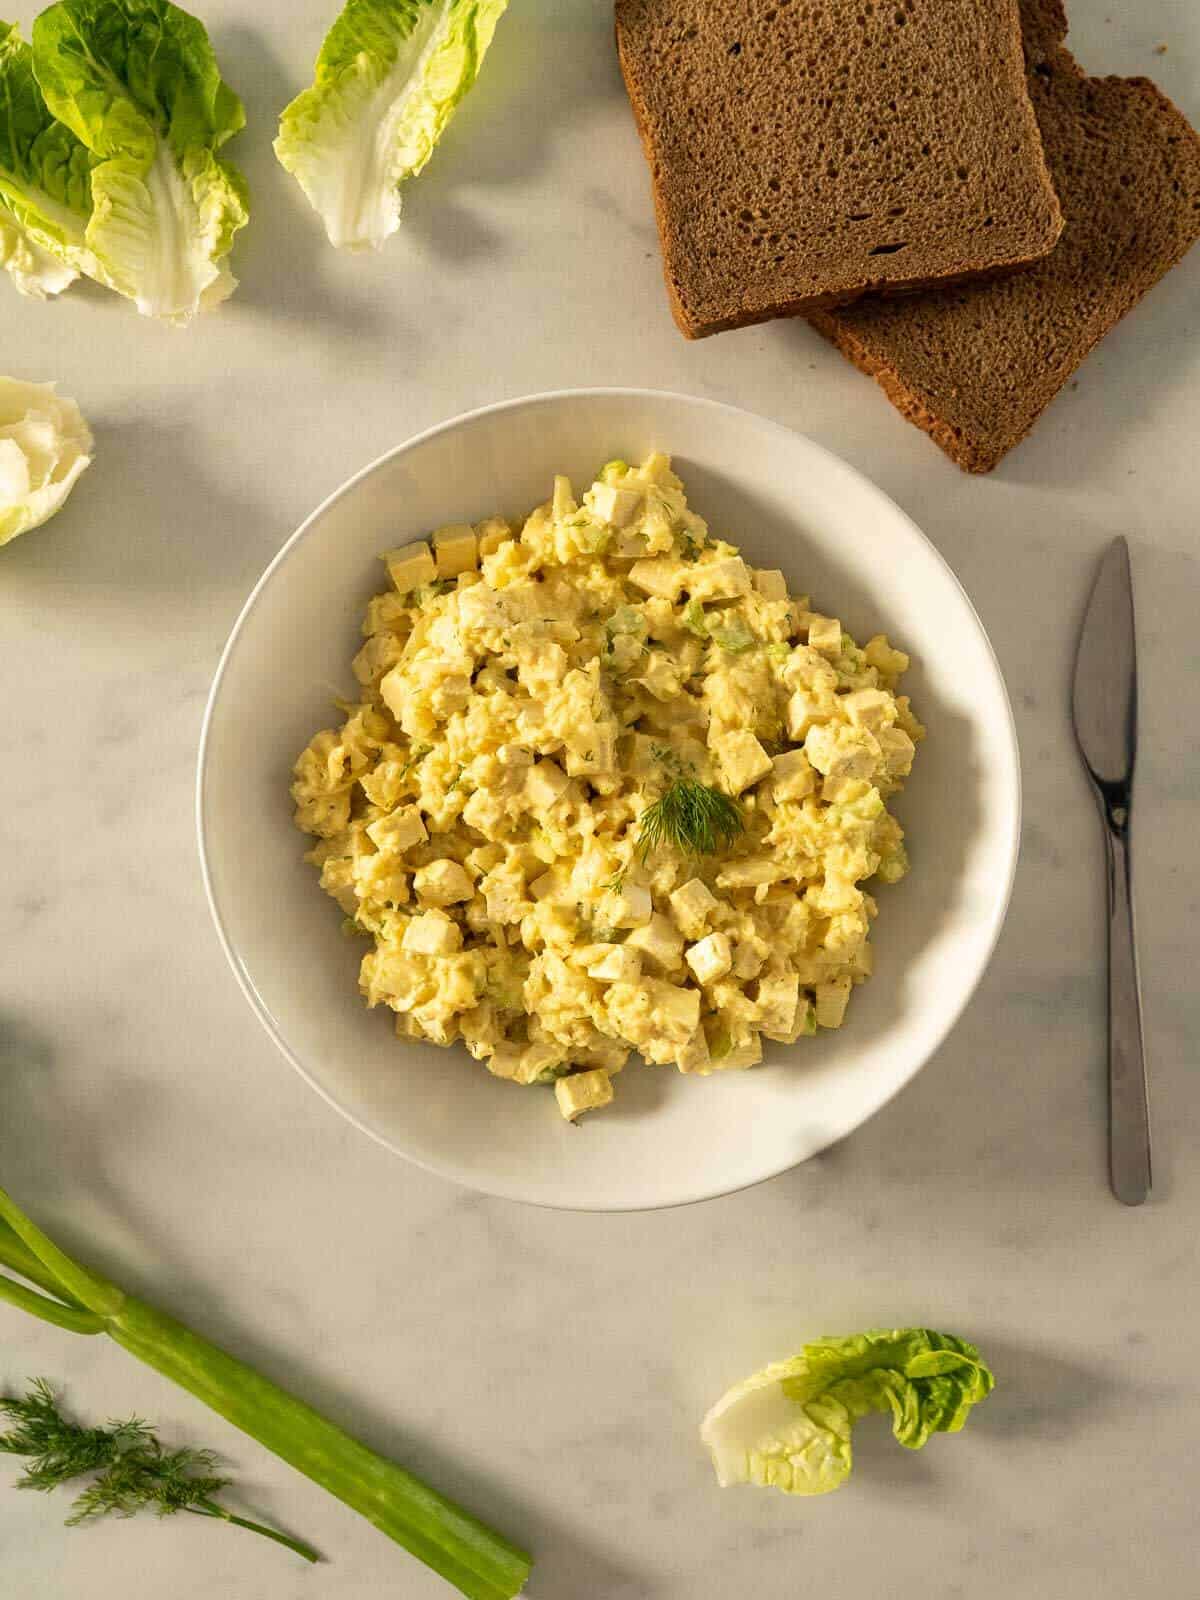 egg salad bowl served next to lettuce leaves and rye bread slices.